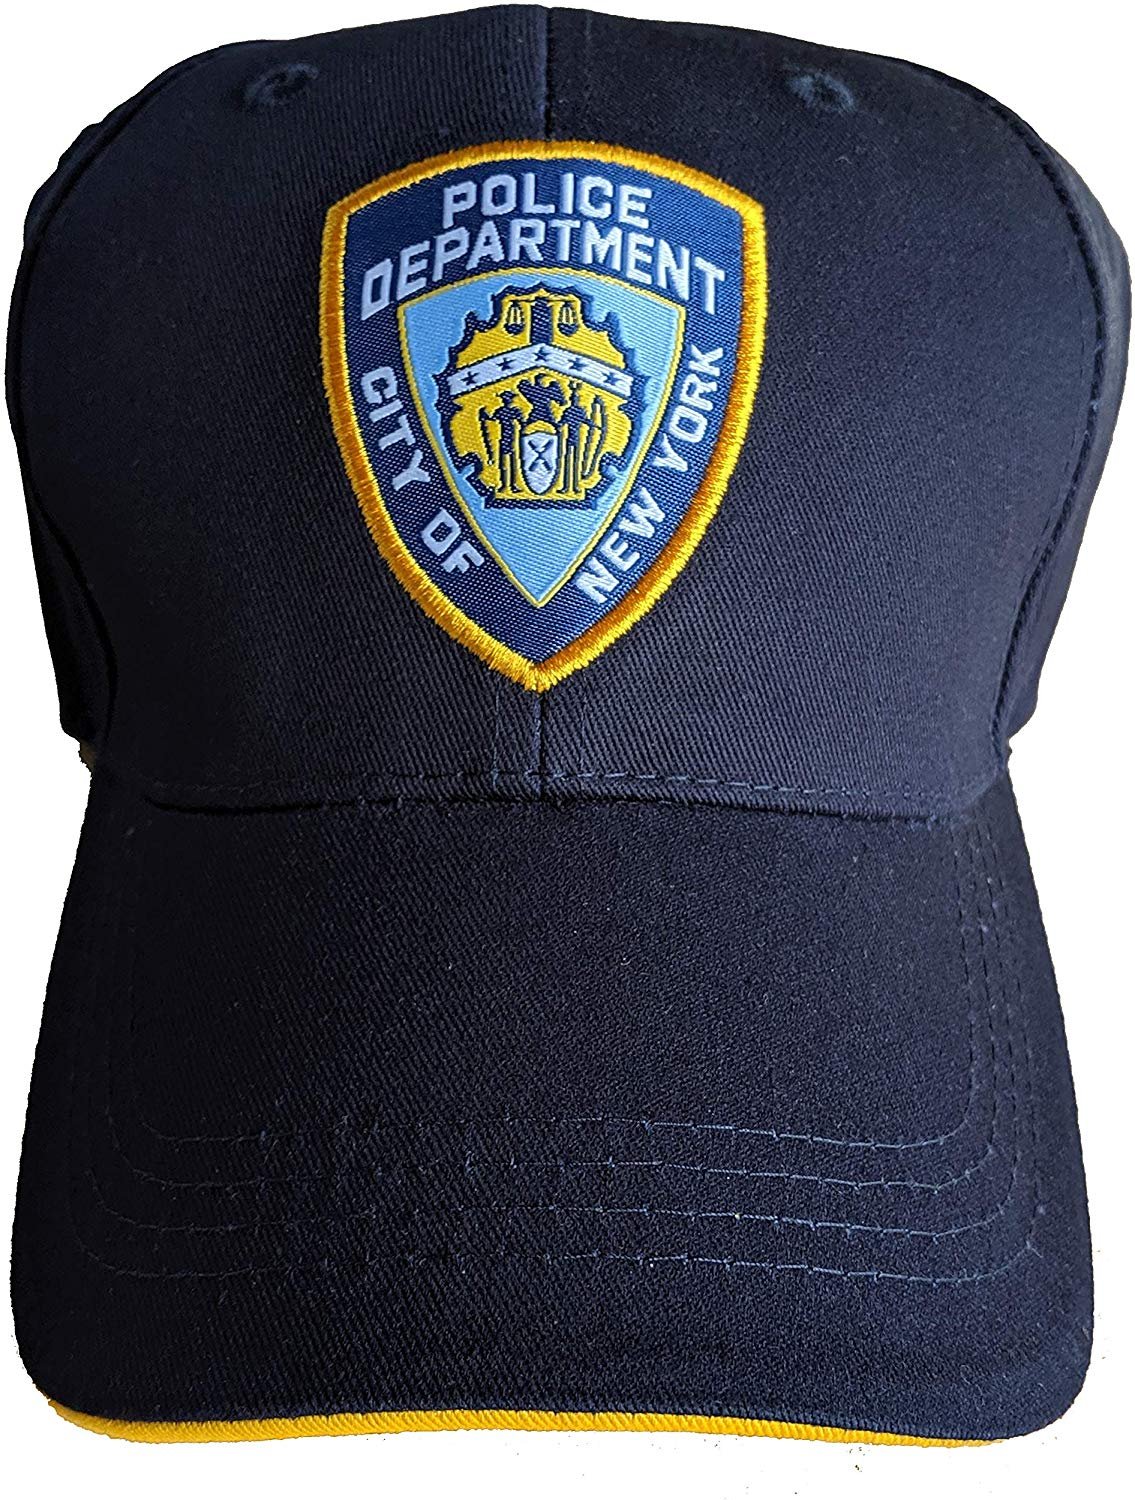 NYPD Baseball Hat New York Police Department (Navy, 99302n)